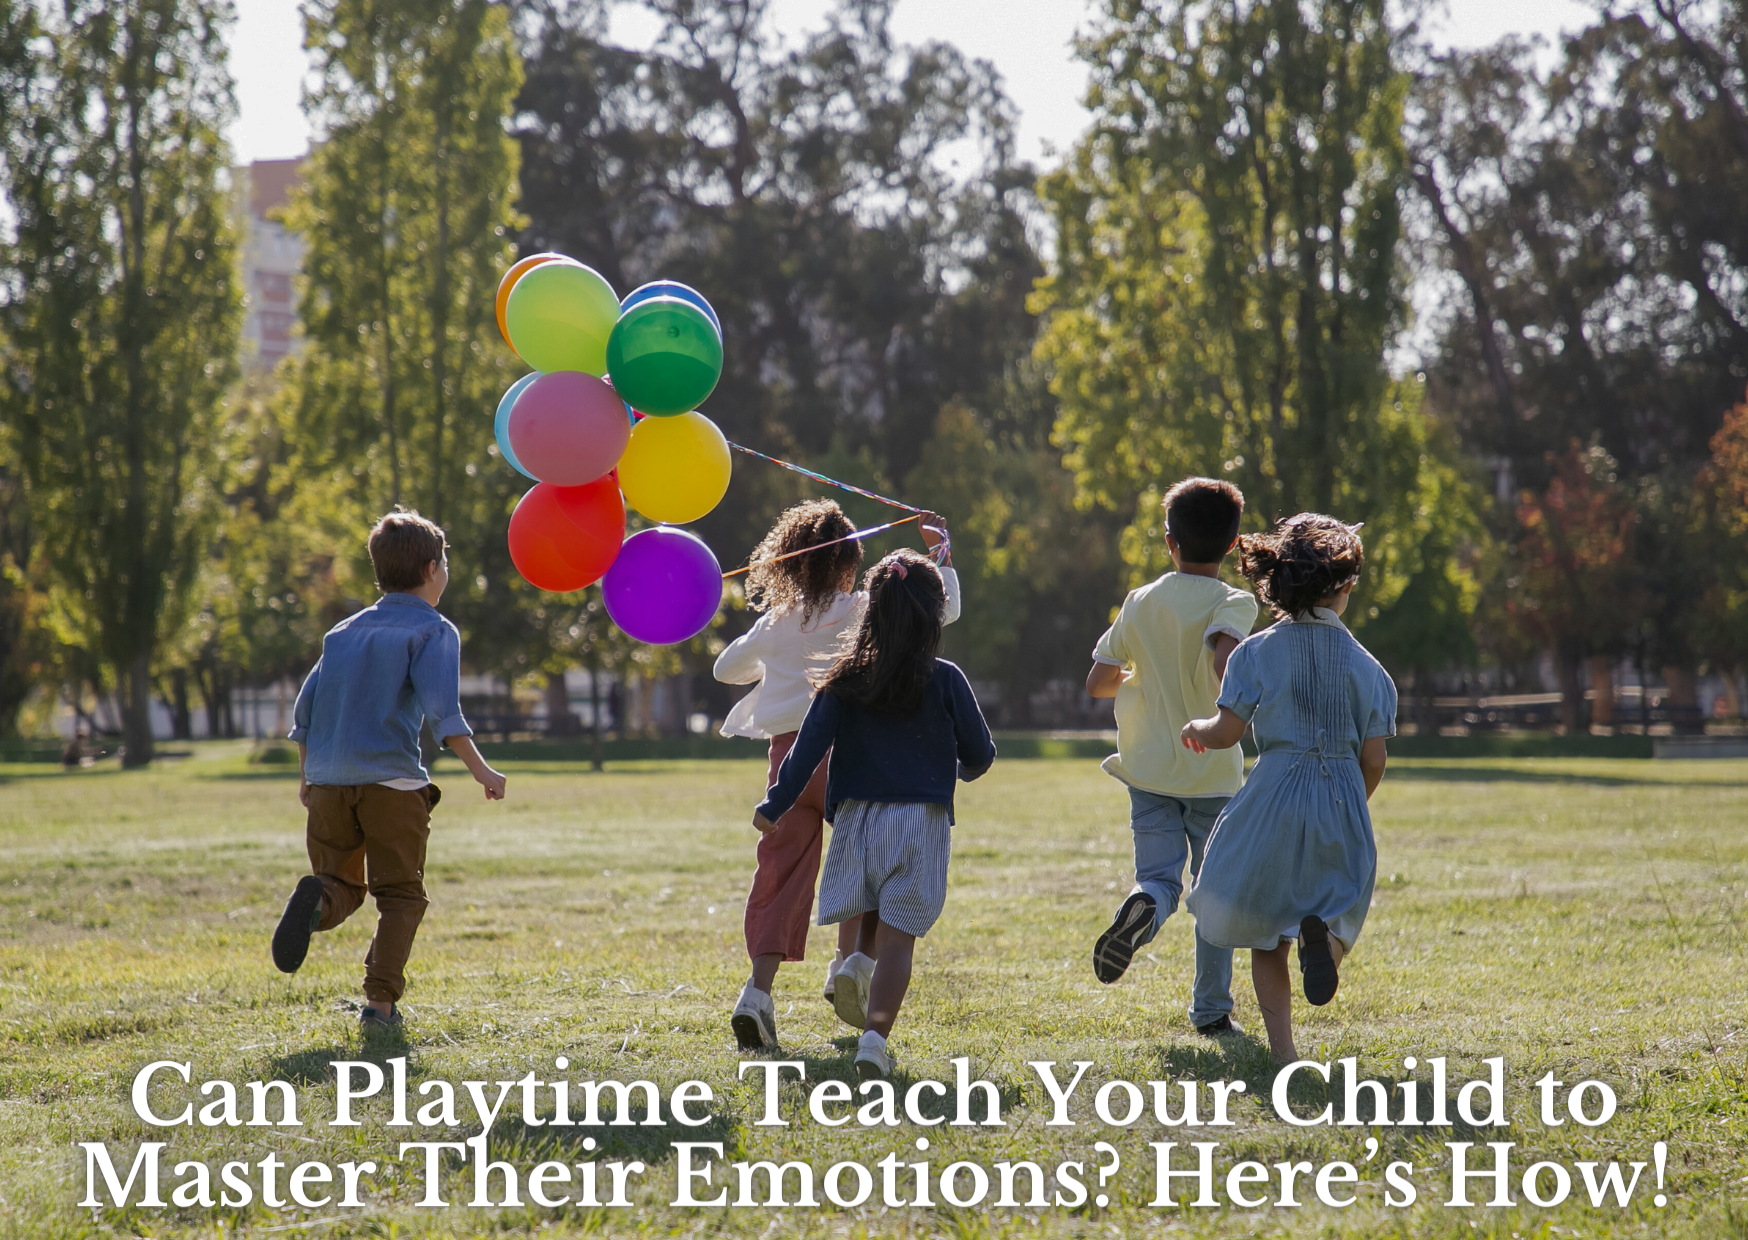 Can Playtime Teach Your Child to Master Their Emotions? Here’s How!